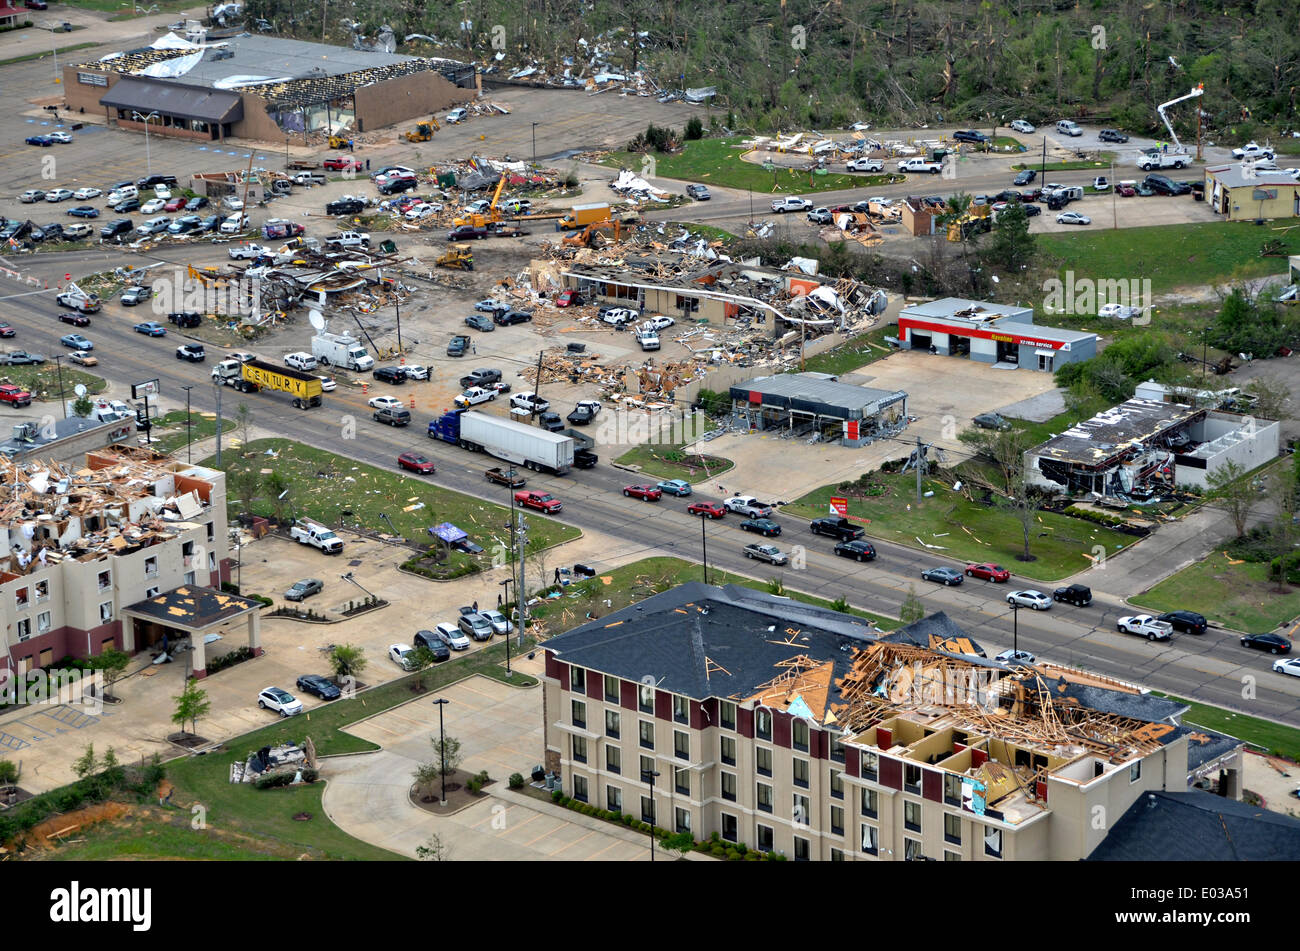 Tupelo, Mississippi, USA. 29th Apr, 2014. Aerial view of buildings at the intersection of Green and North Gloster destroyed by tornadoes that swept across the southern states killing 35 people April 29, 2014 in Tupelo, Mississippi. Credit:  Planetpix/Alamy Live News Stock Photo